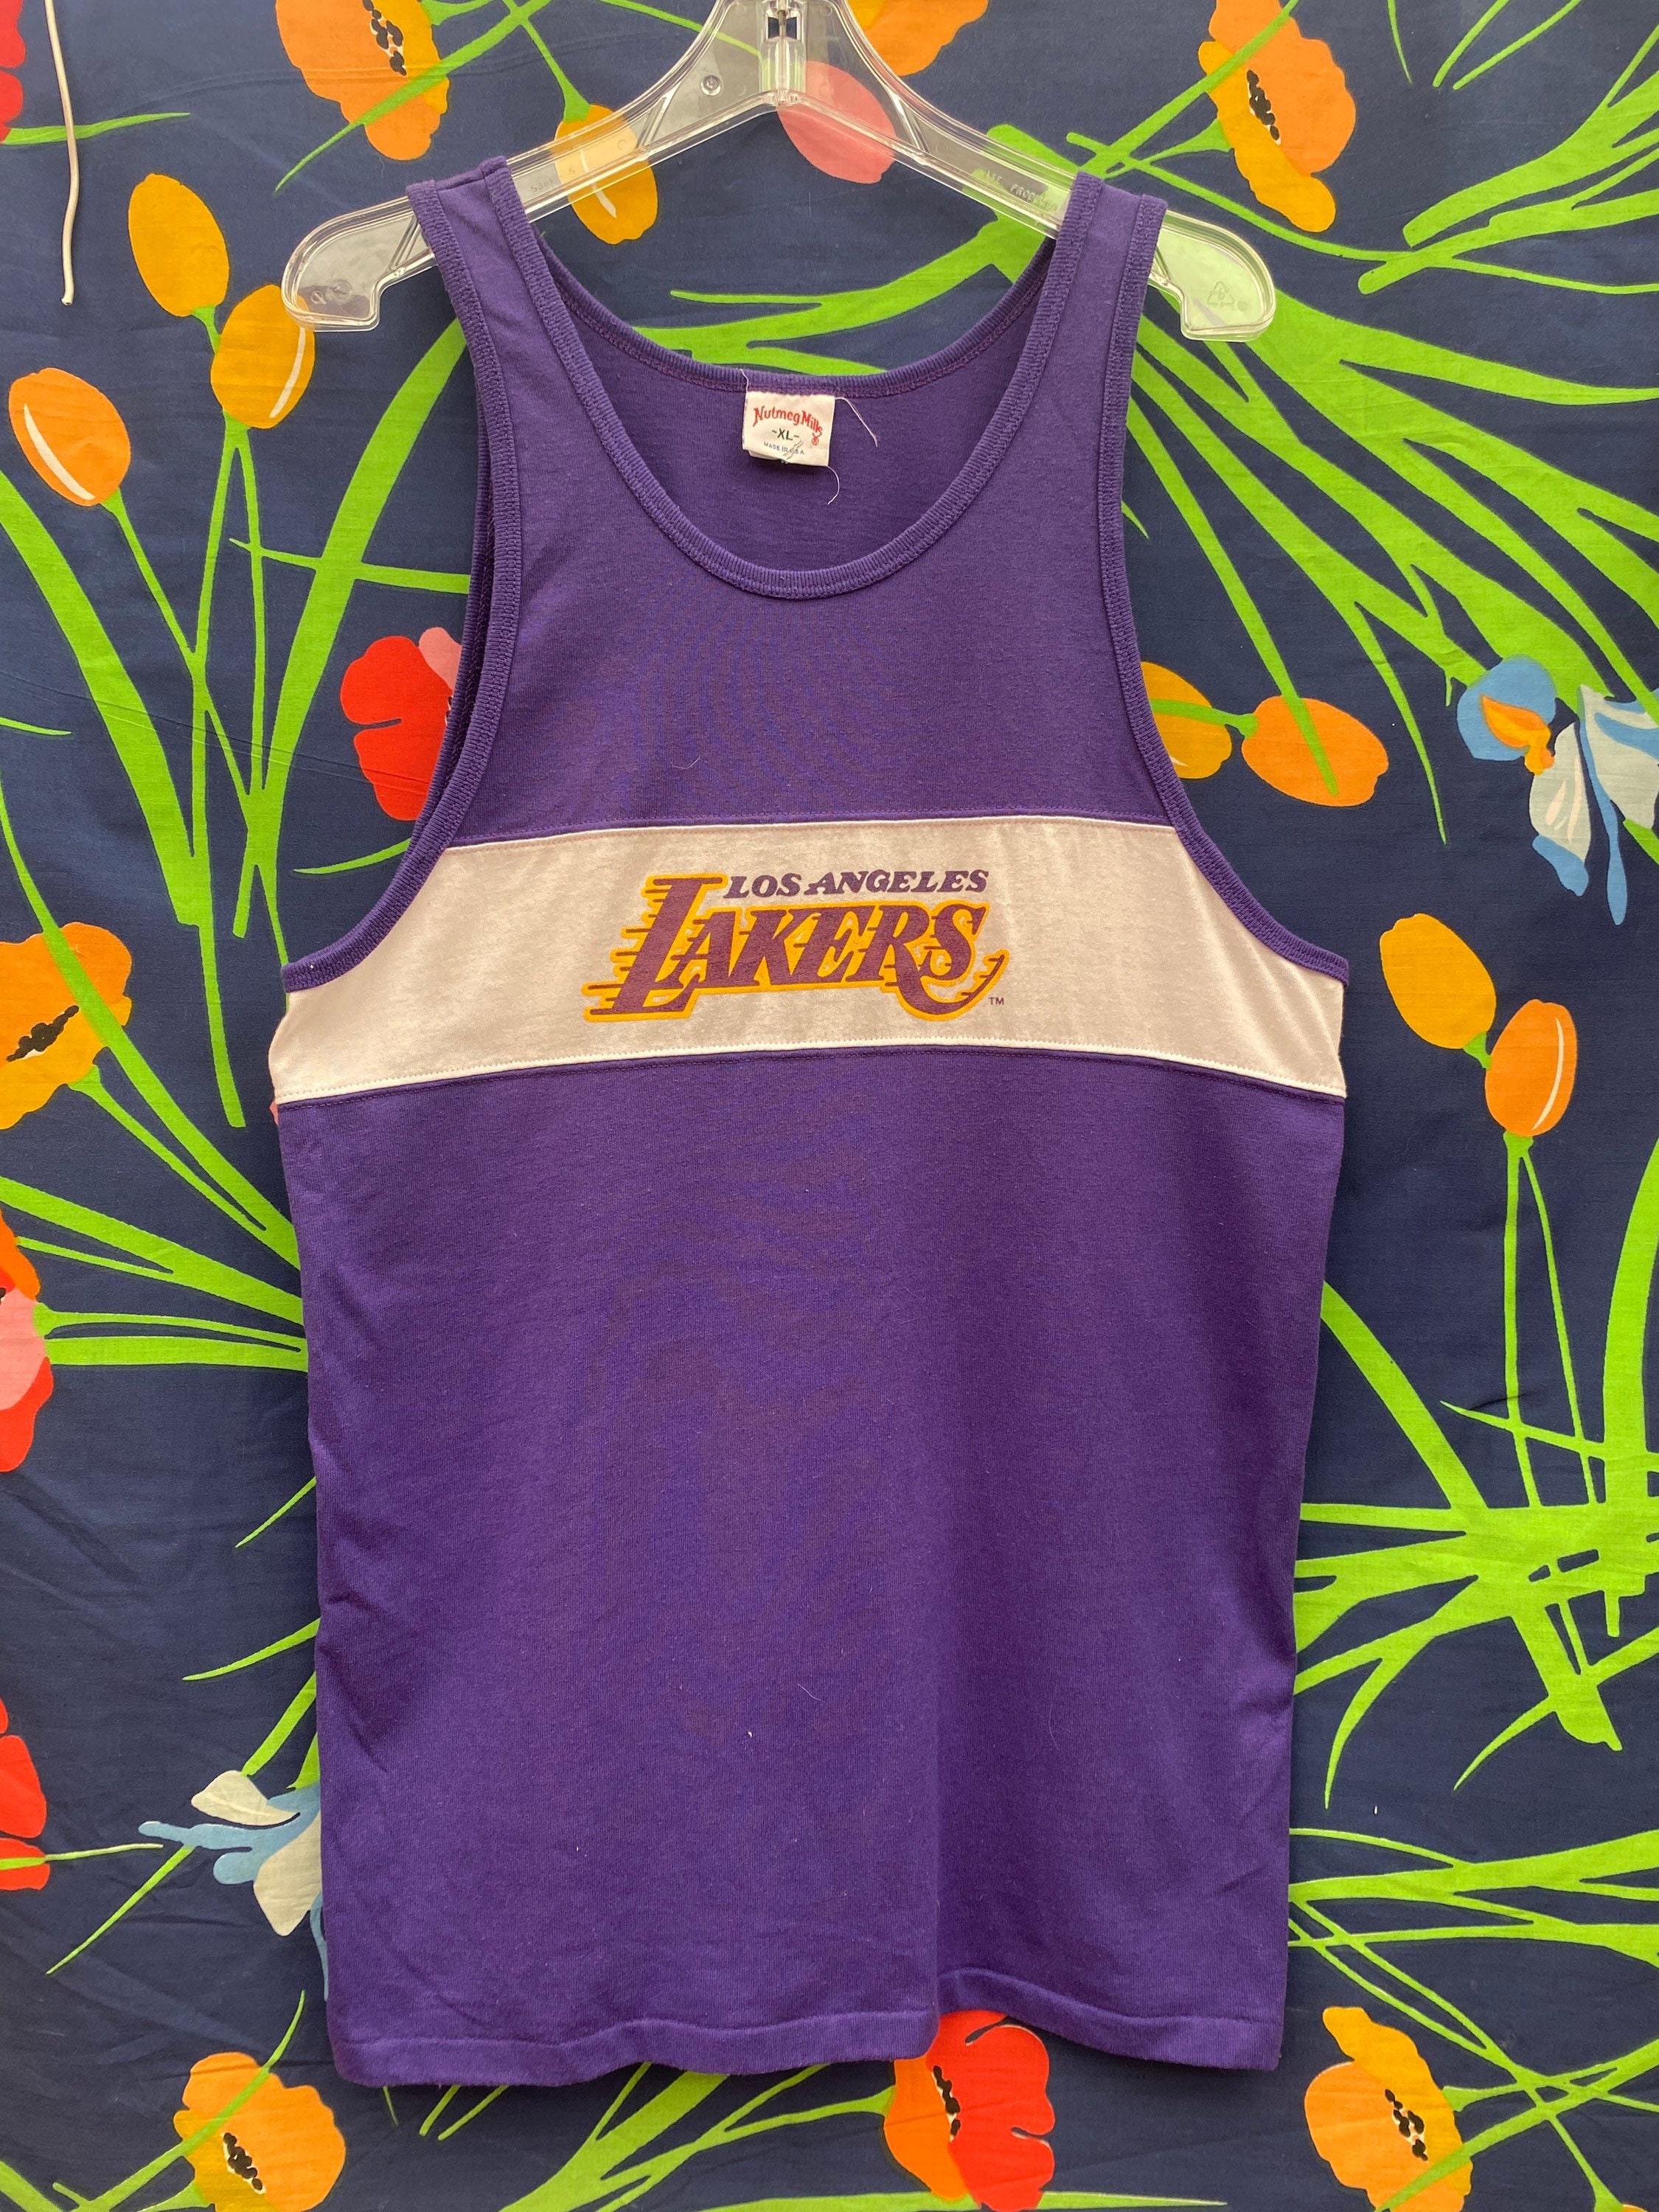 Authentic A.C. Green Los Angeles Lakers Jersey 48 XL Champion Rare